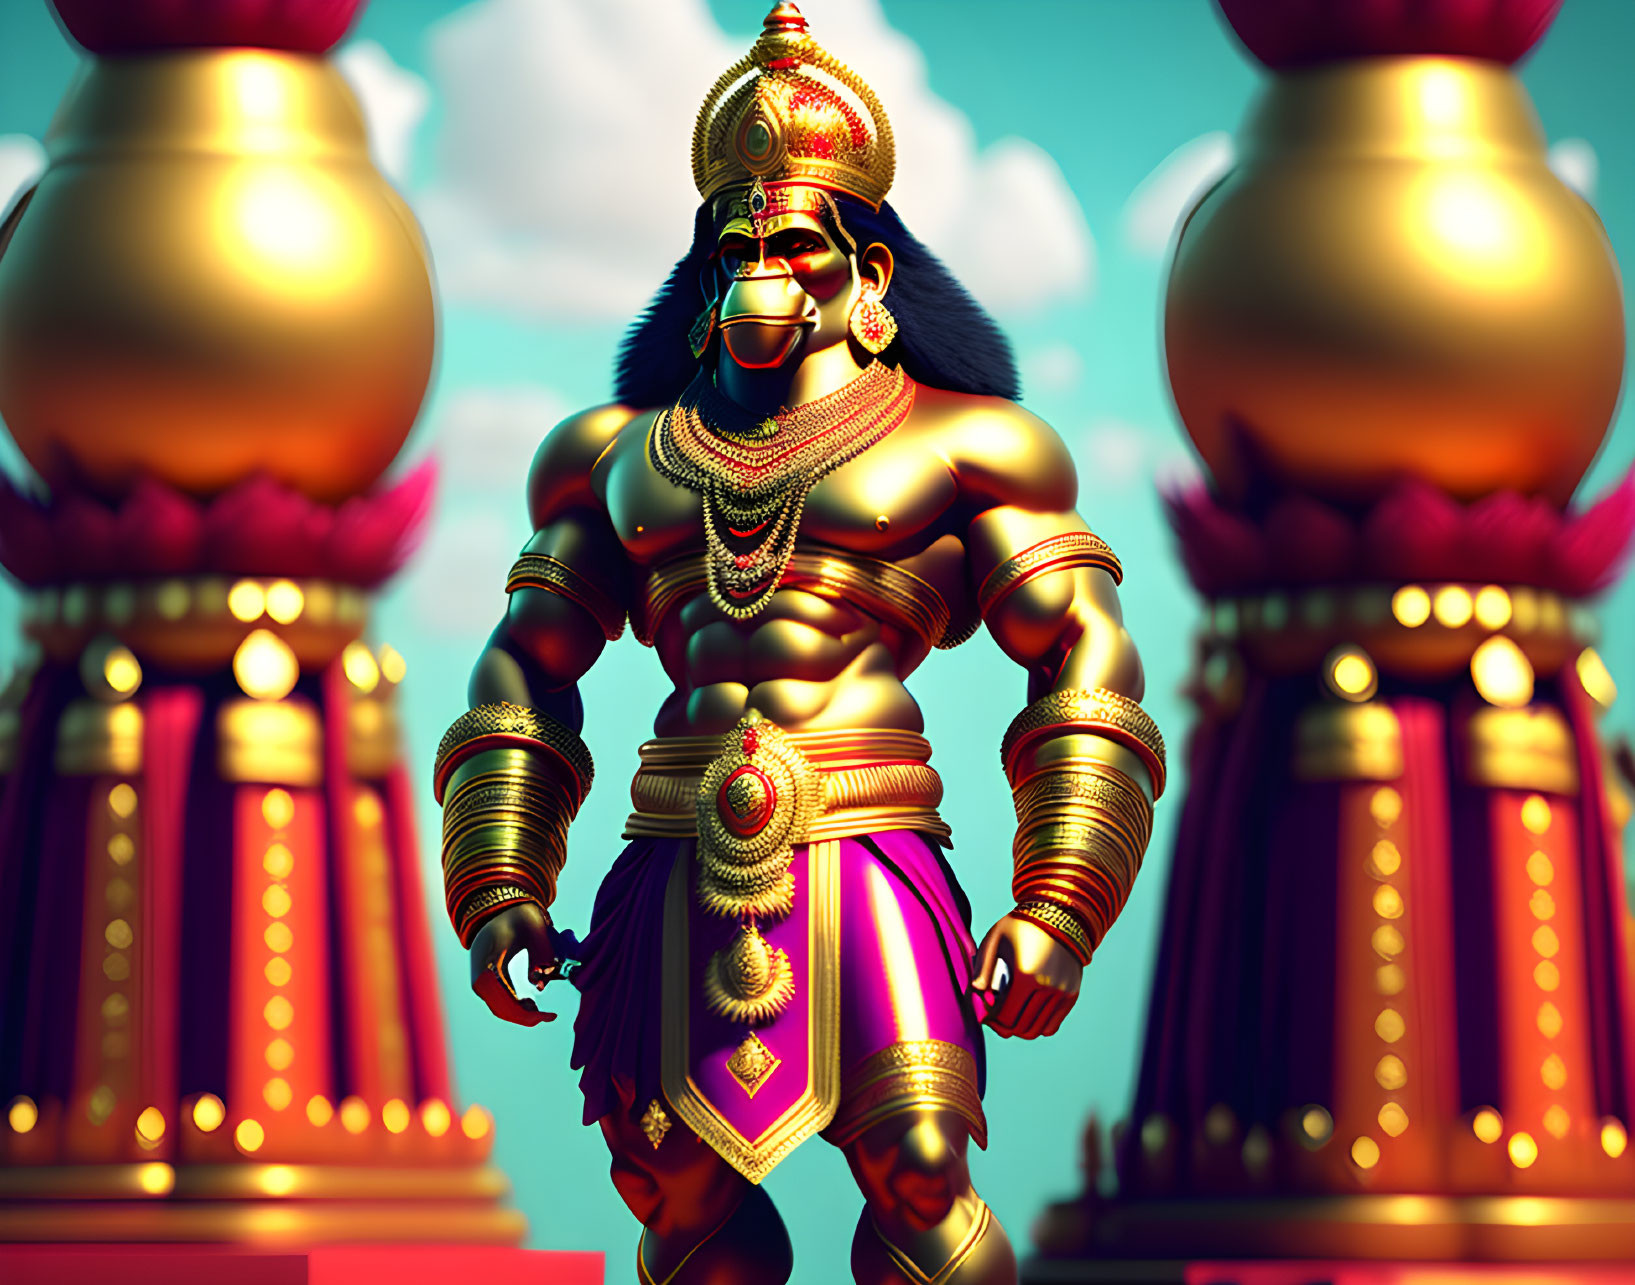 Muscular figure in golden armor with monkey-like face against golden urns